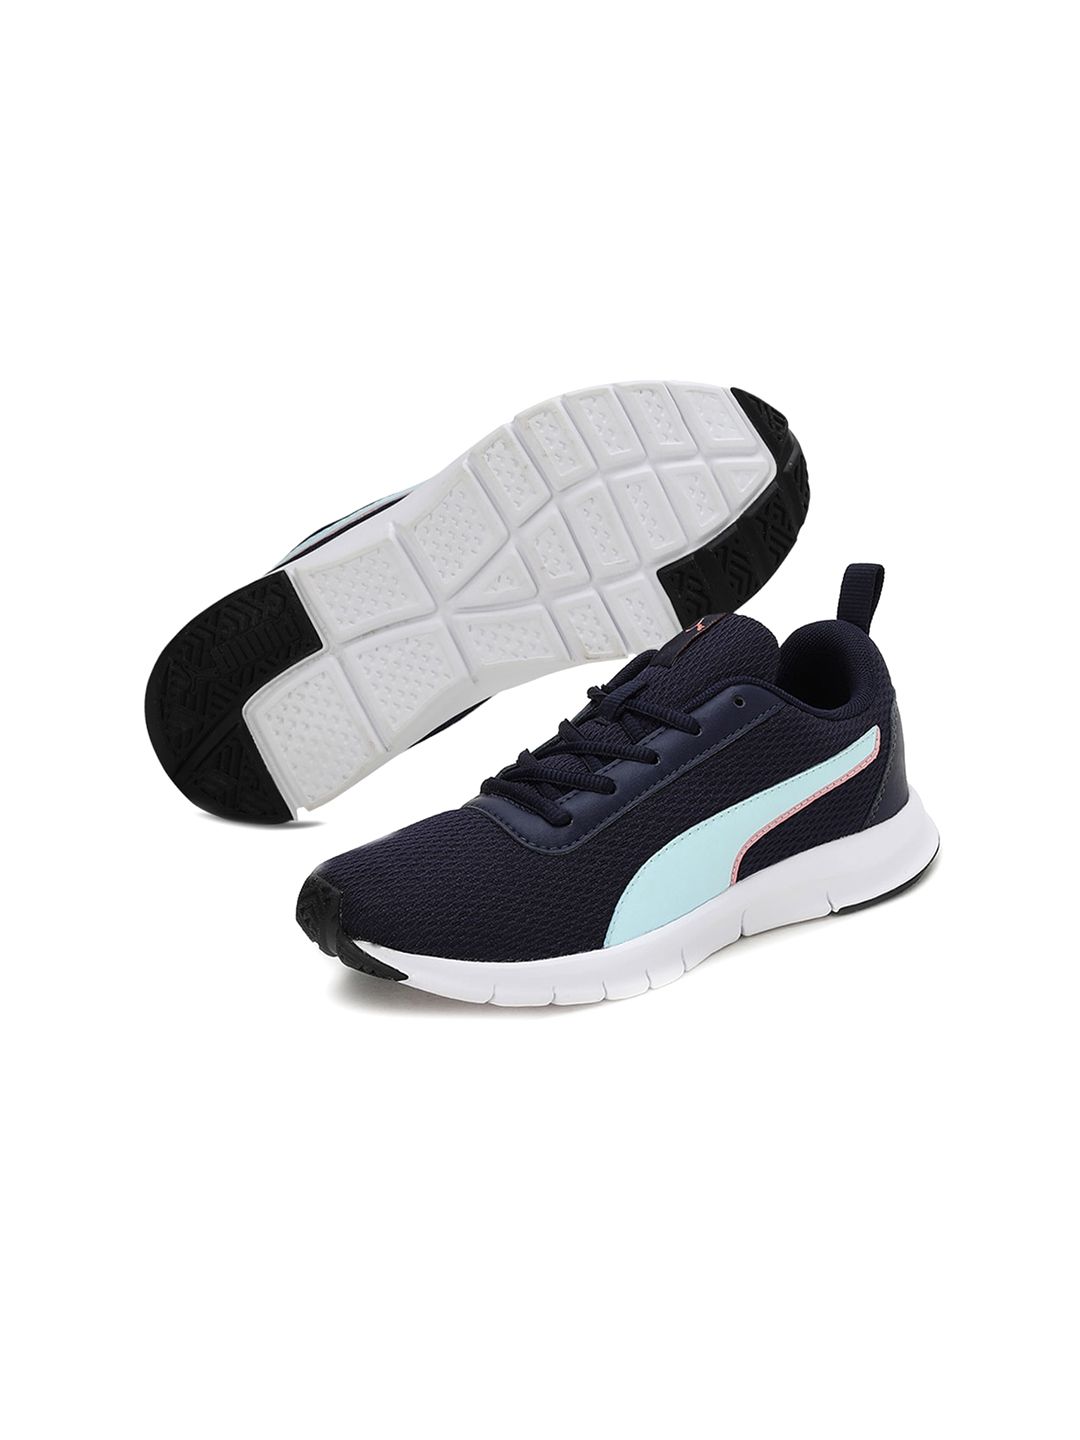 Puma Women Navy Blue Woven Design Sneakers Price in India